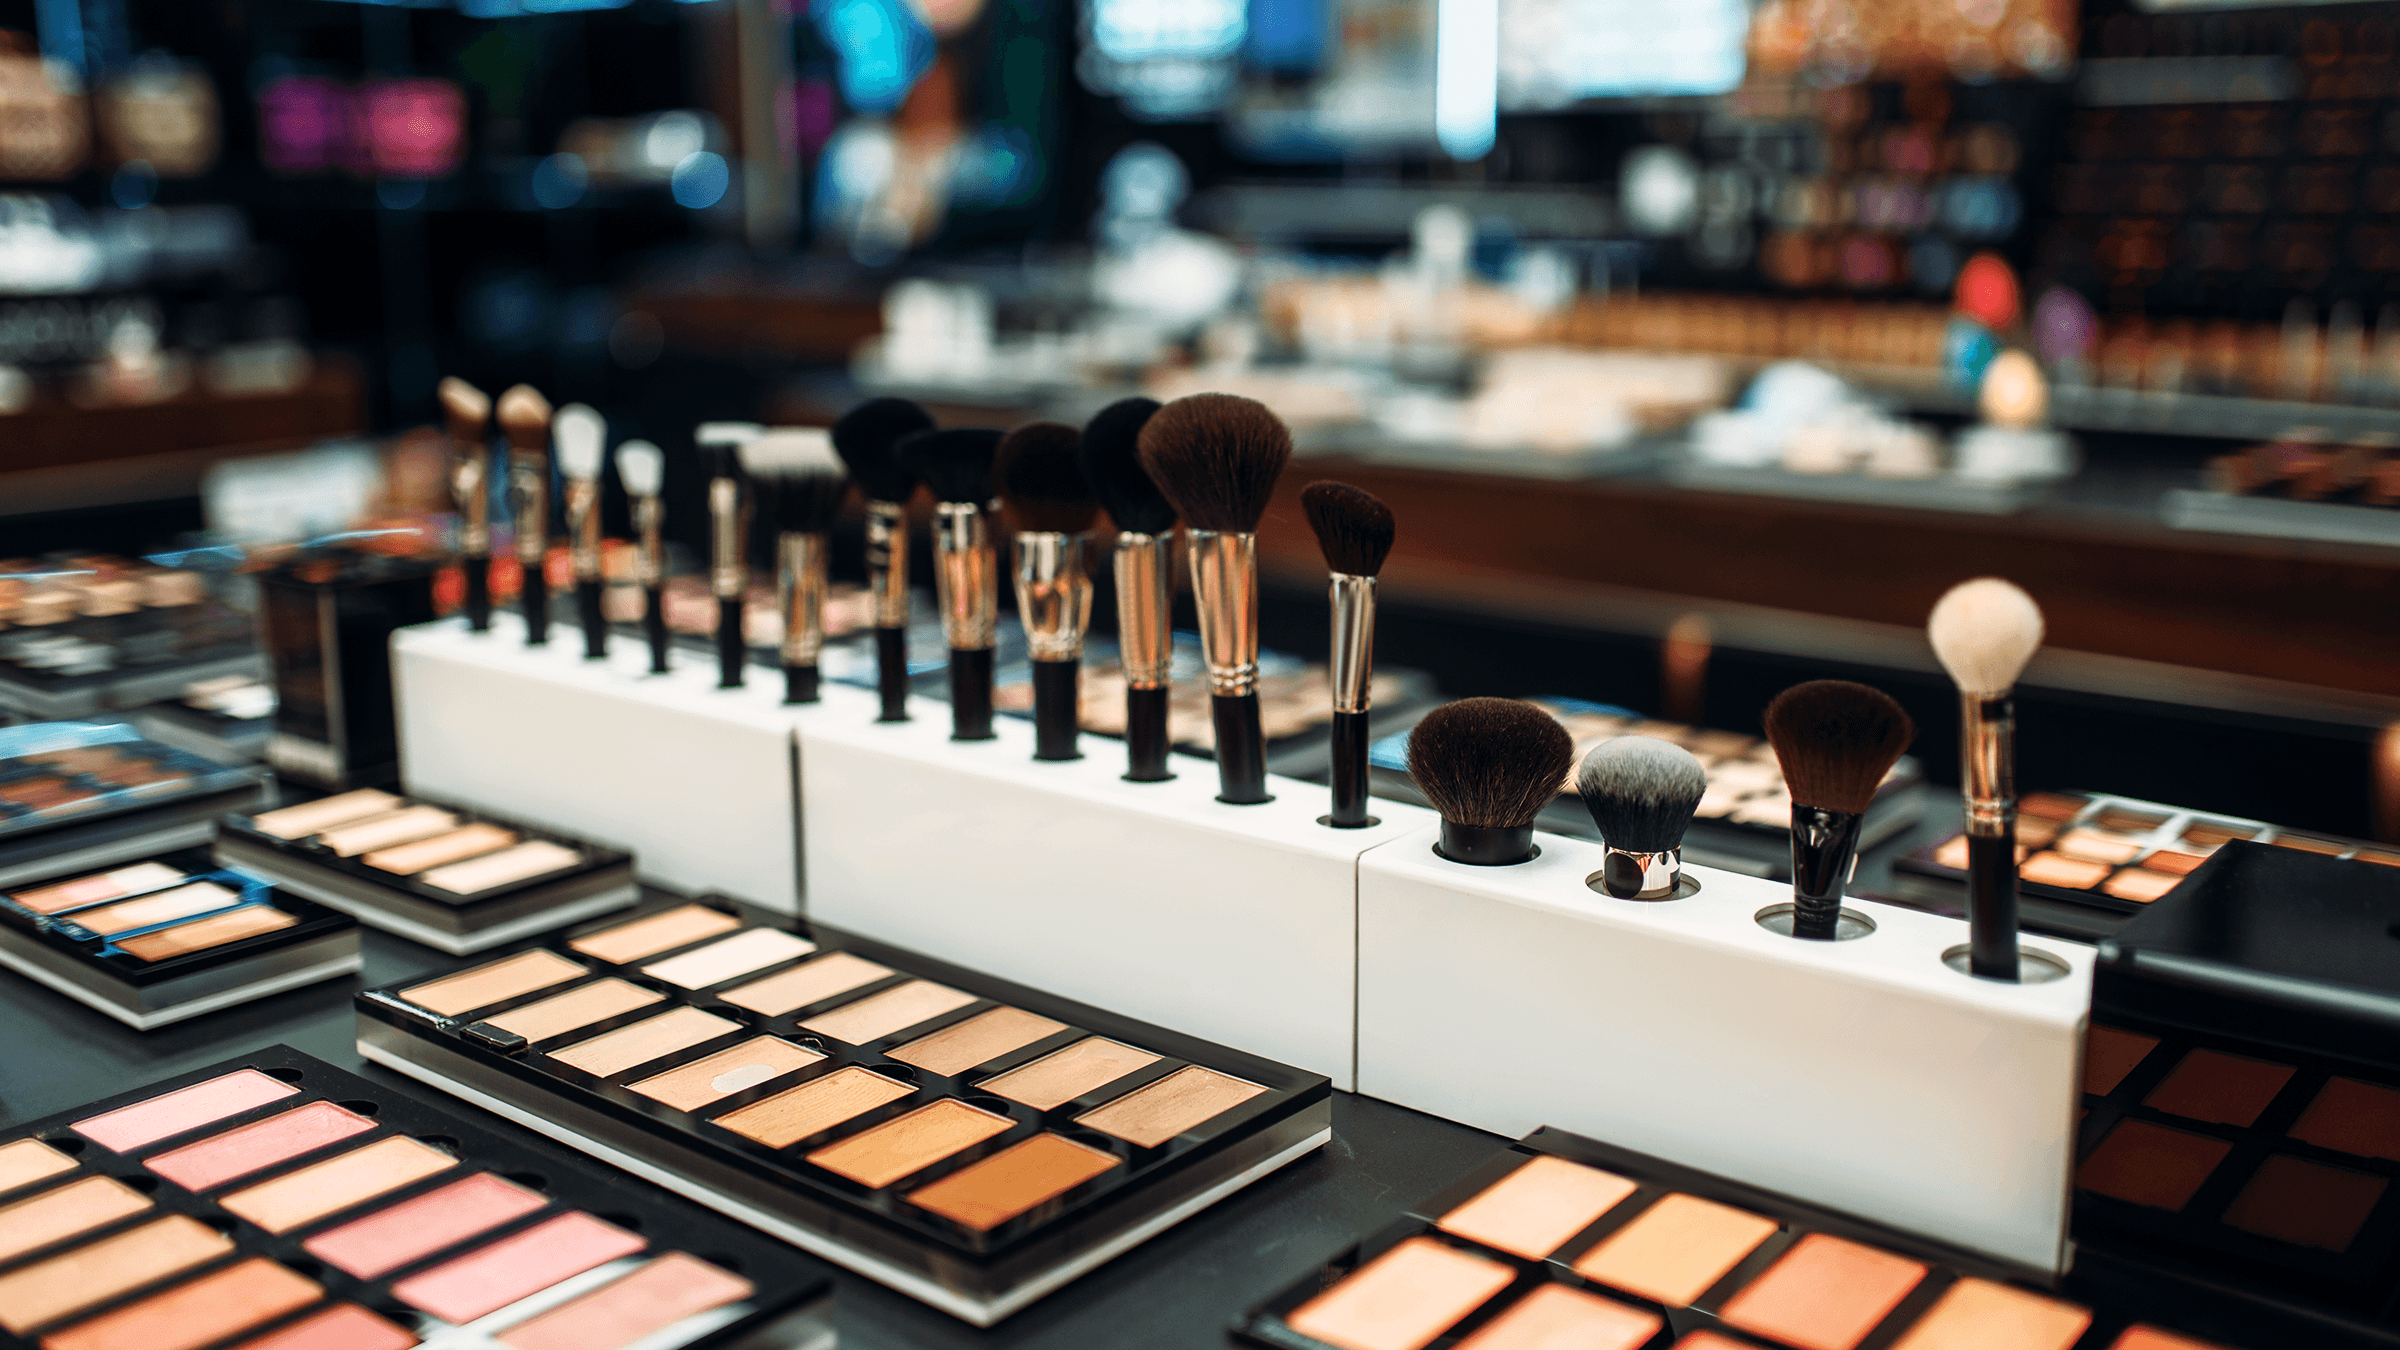 Will prestige beauty sell in big-box stores?